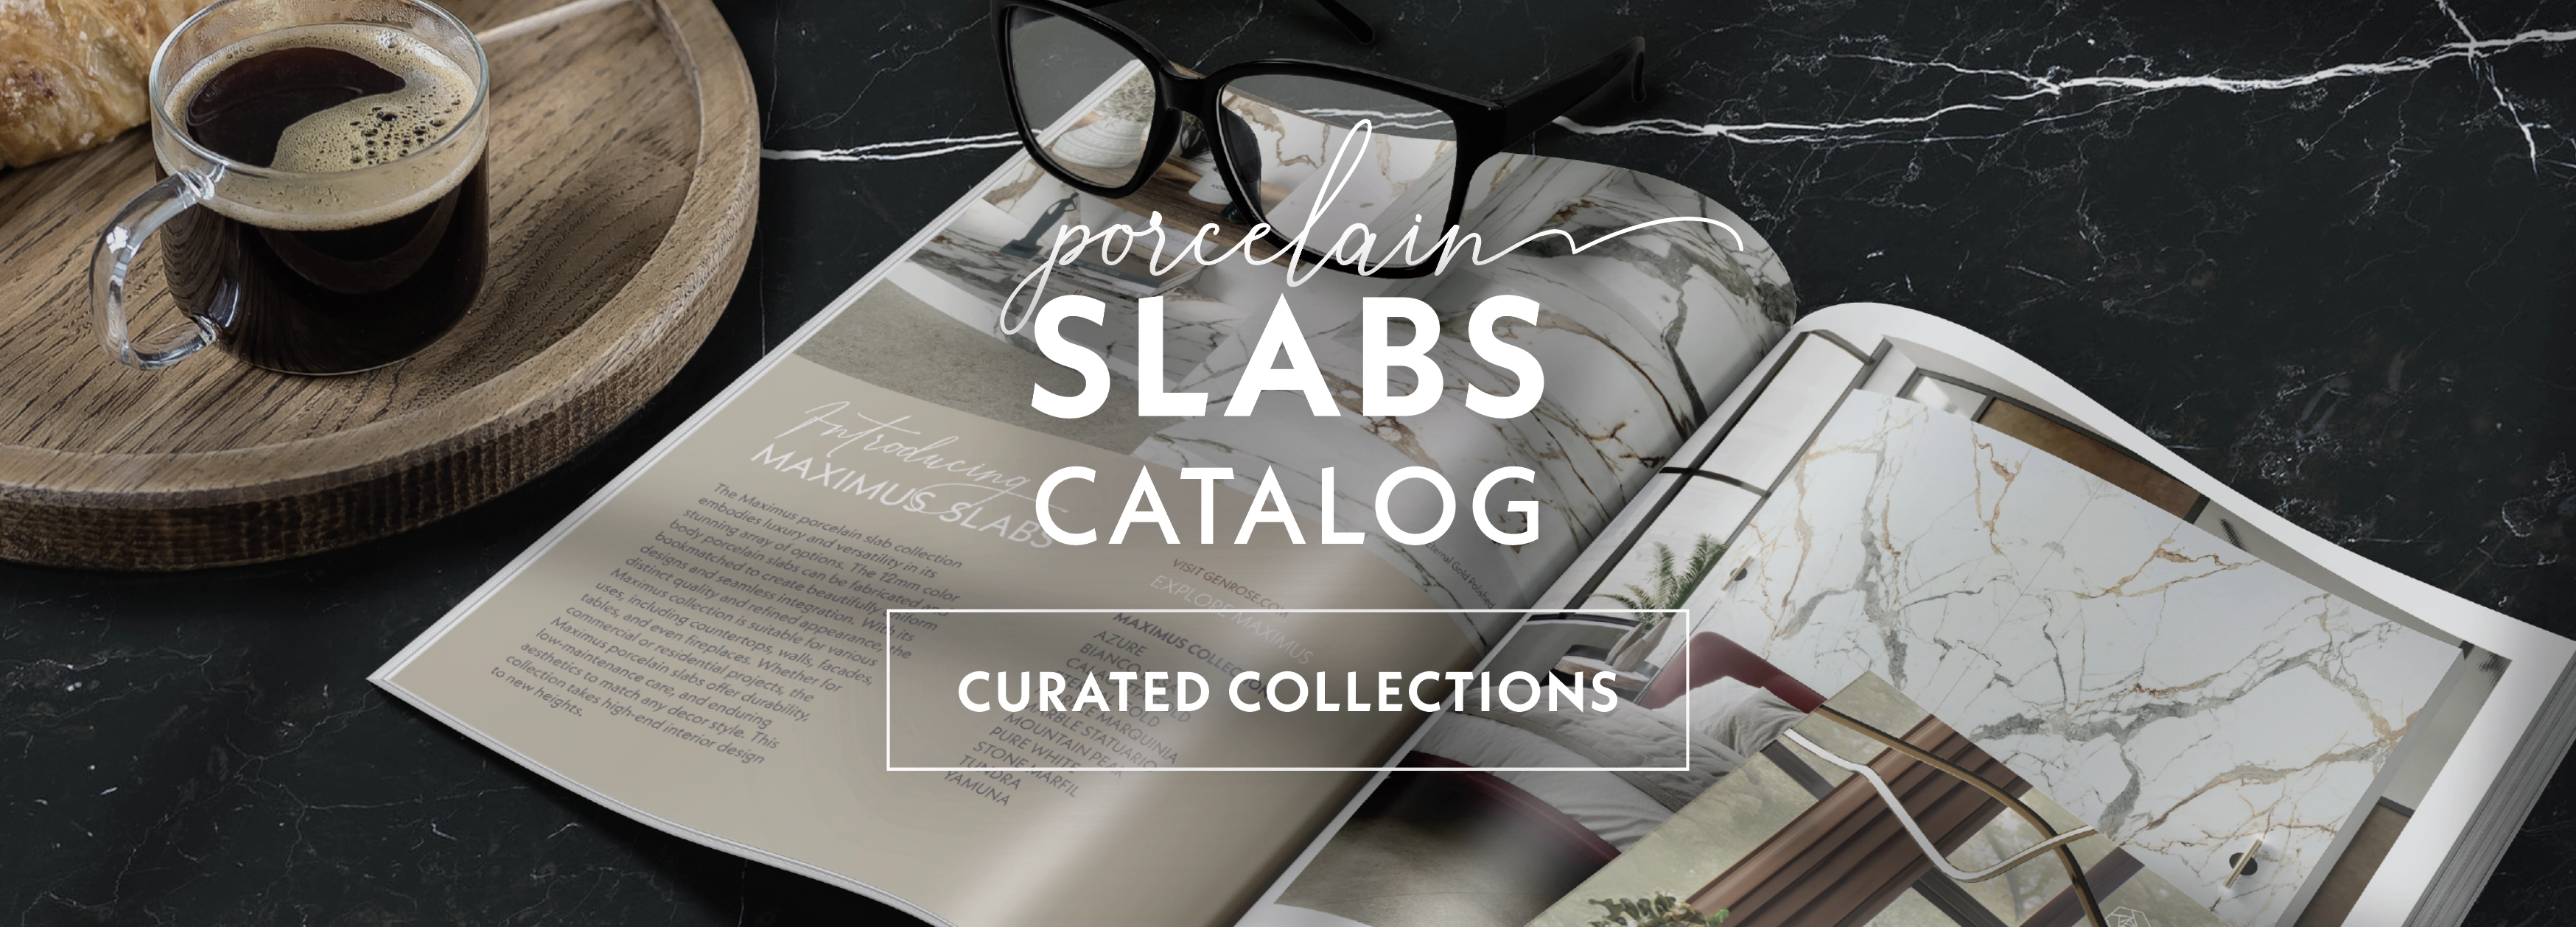 Porcelain Slab Catalog - Curated Collections